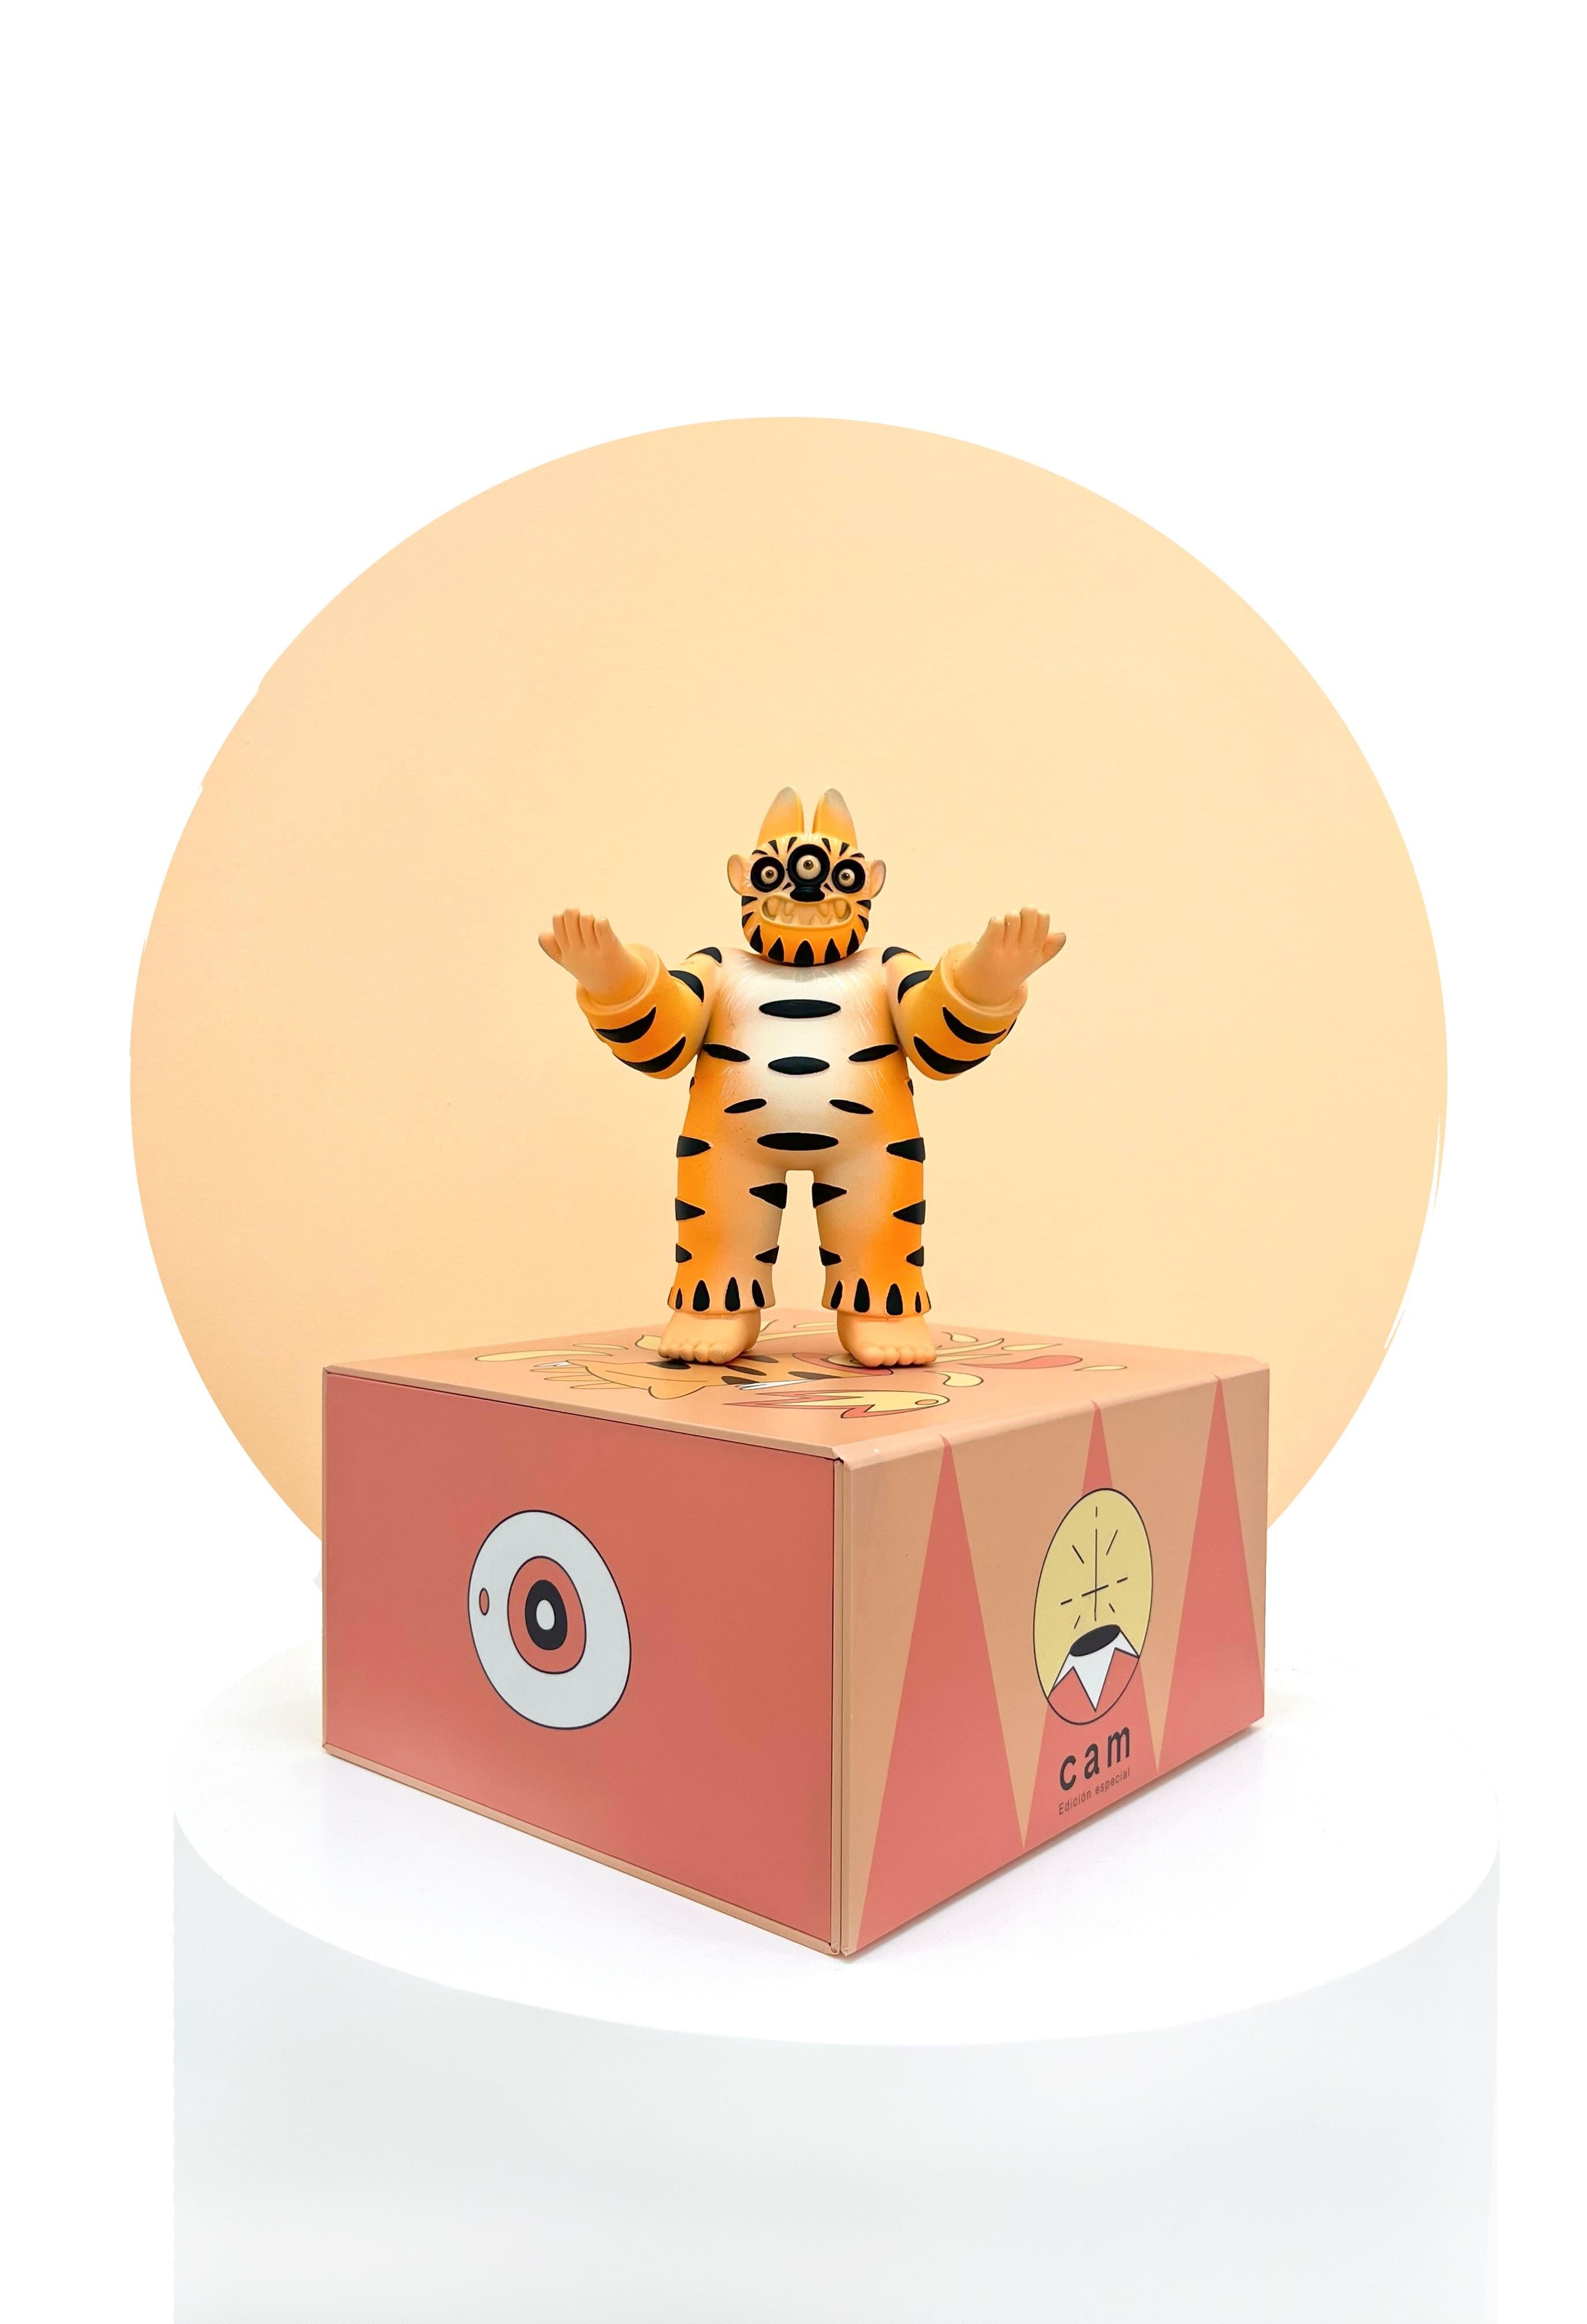 Mr. Mitote Animal Painting - "Tigre atacando" 1/20, mini sculpture, special edition, art toy, tiger, Mexican